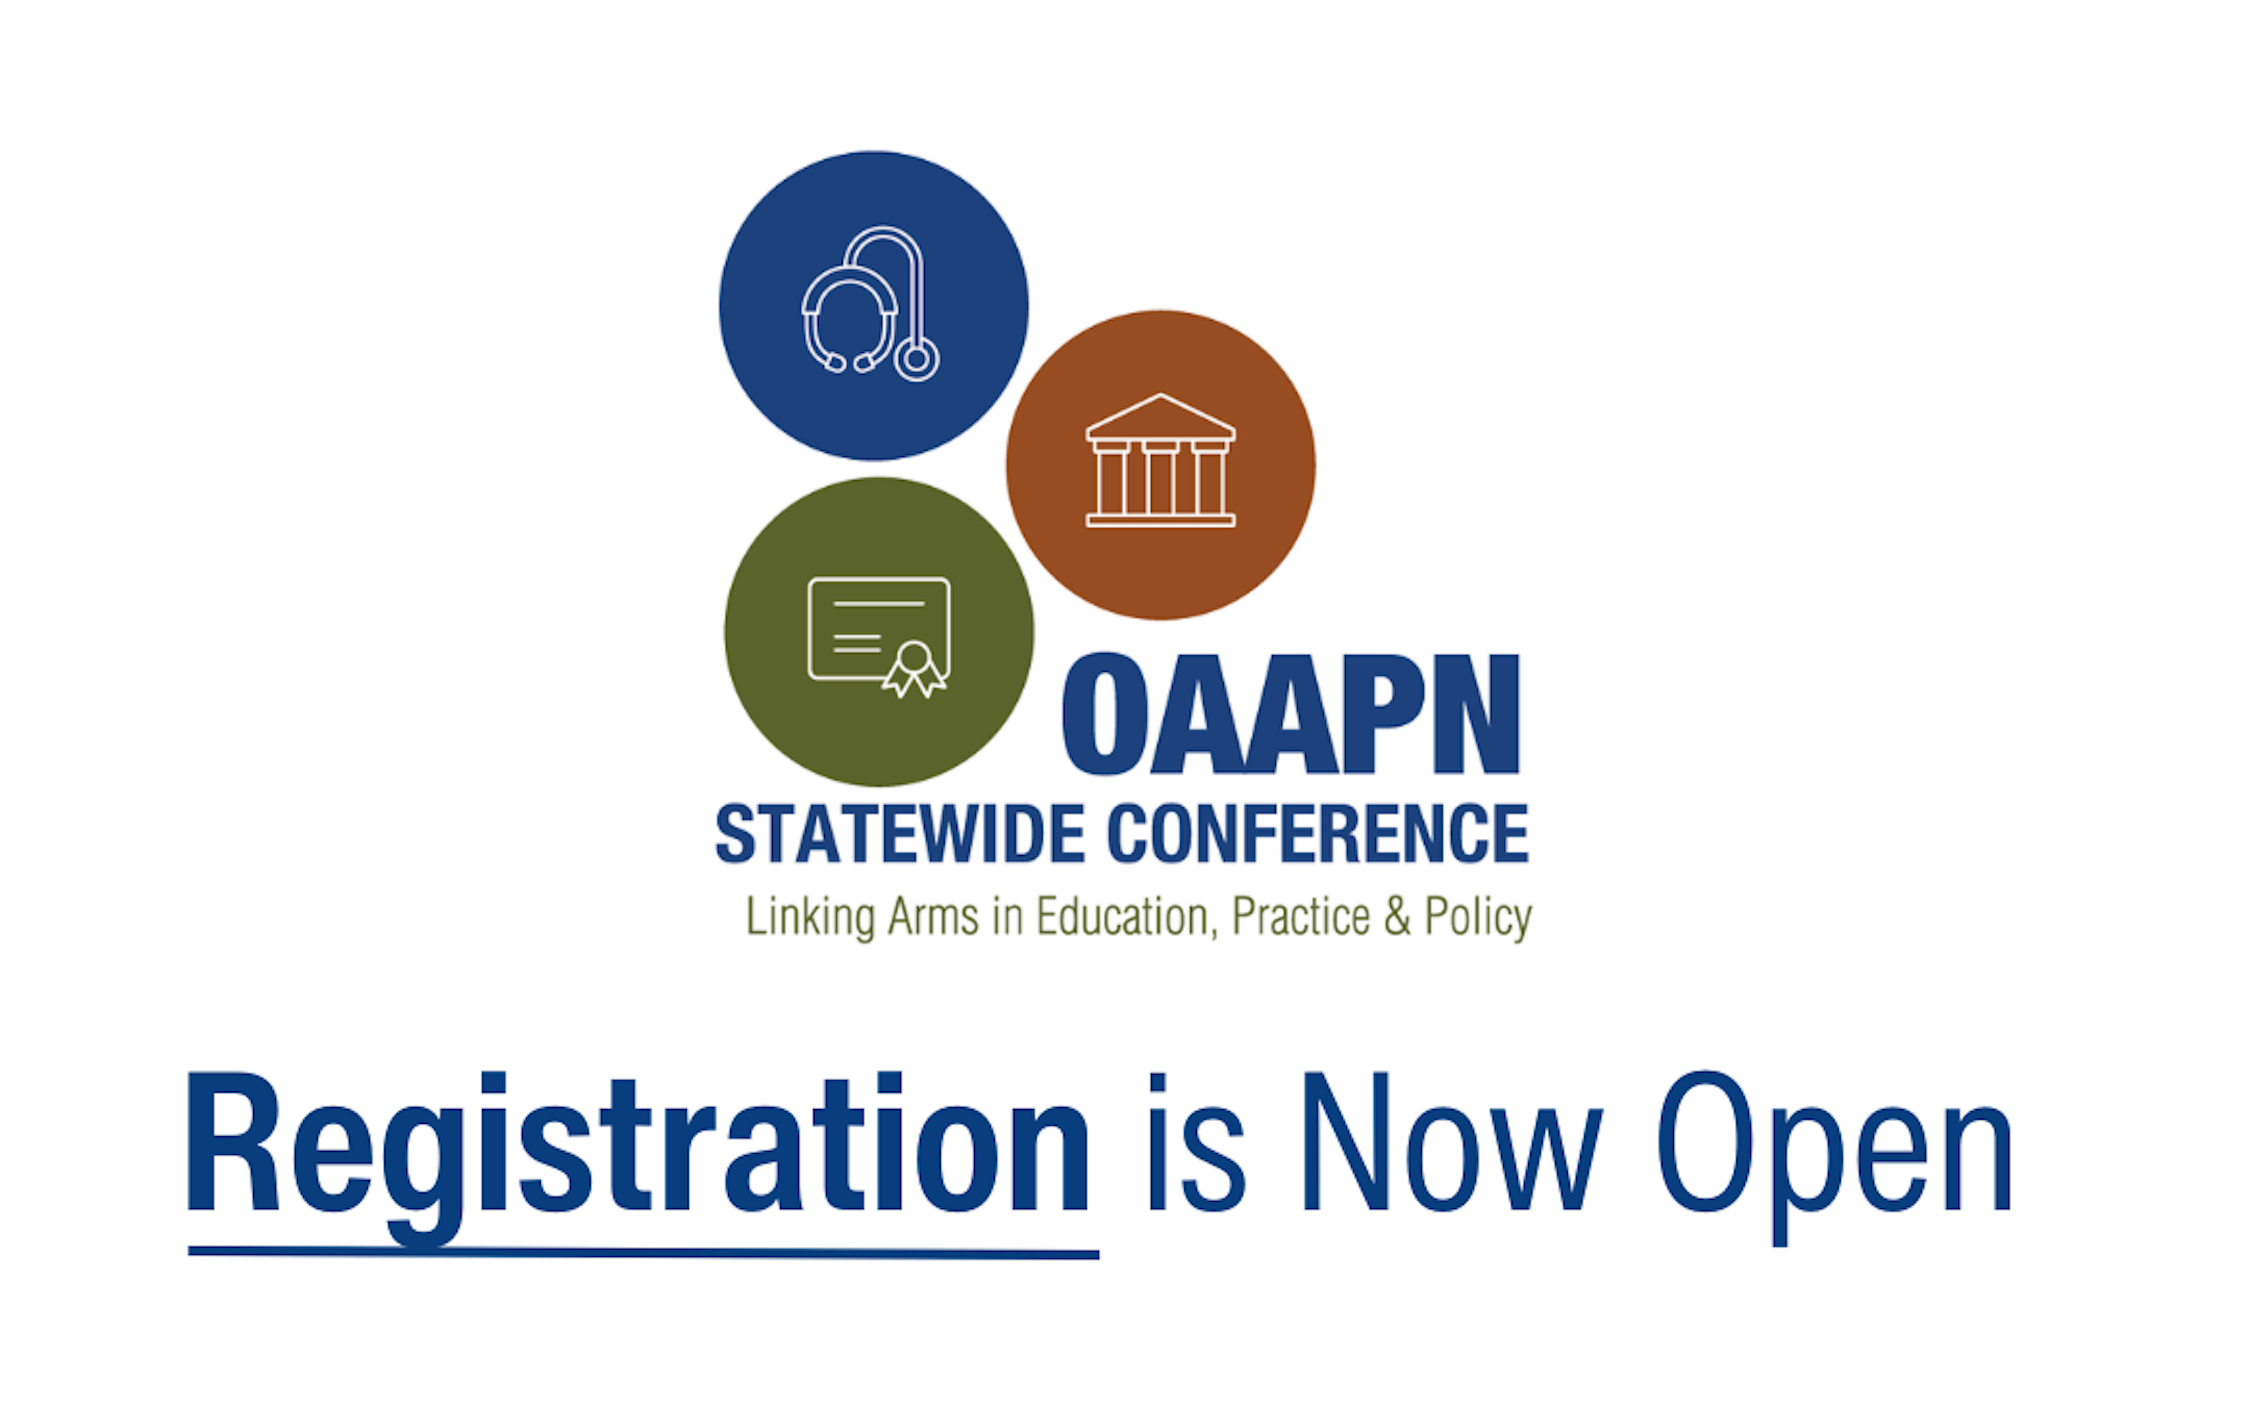 Registration for the 2023 OAAPN Statewide Conference is now open.